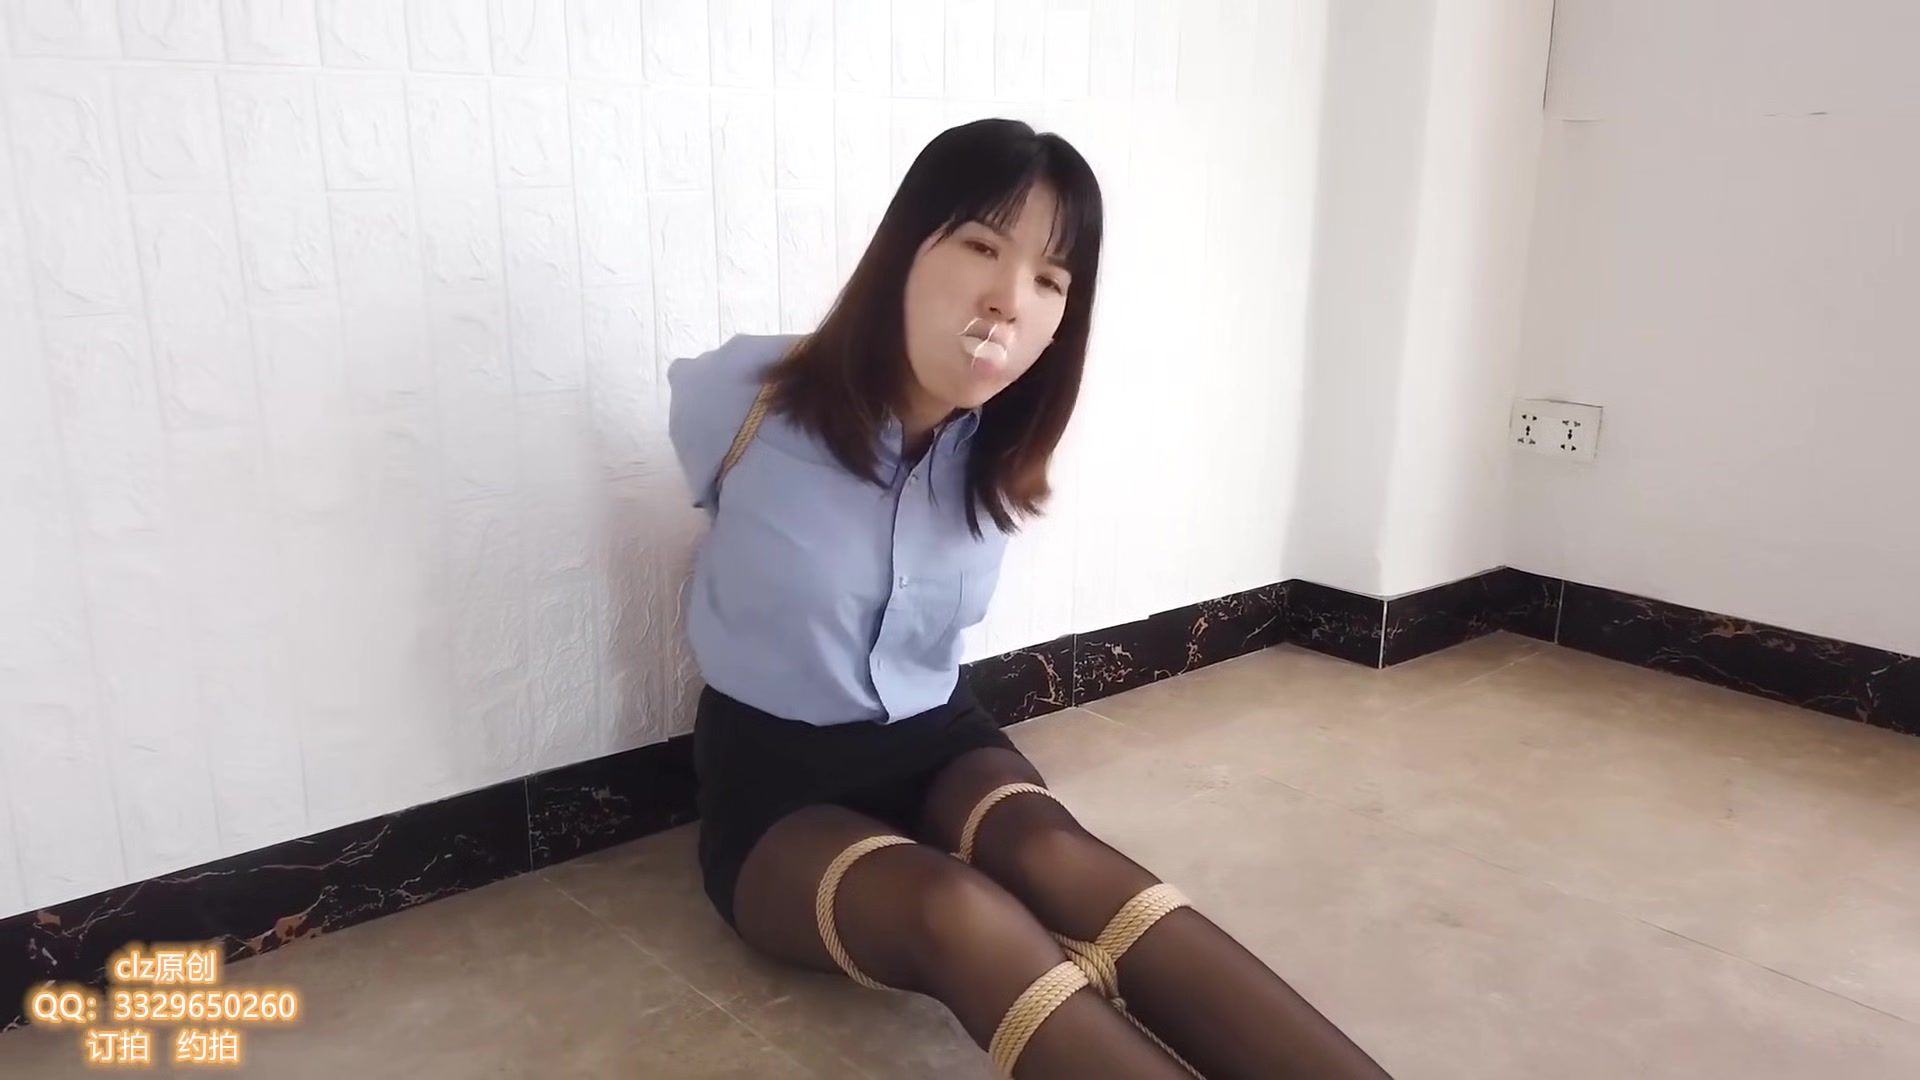 Husband Asian Girl Tied And Tape Gagged SexScat - 1